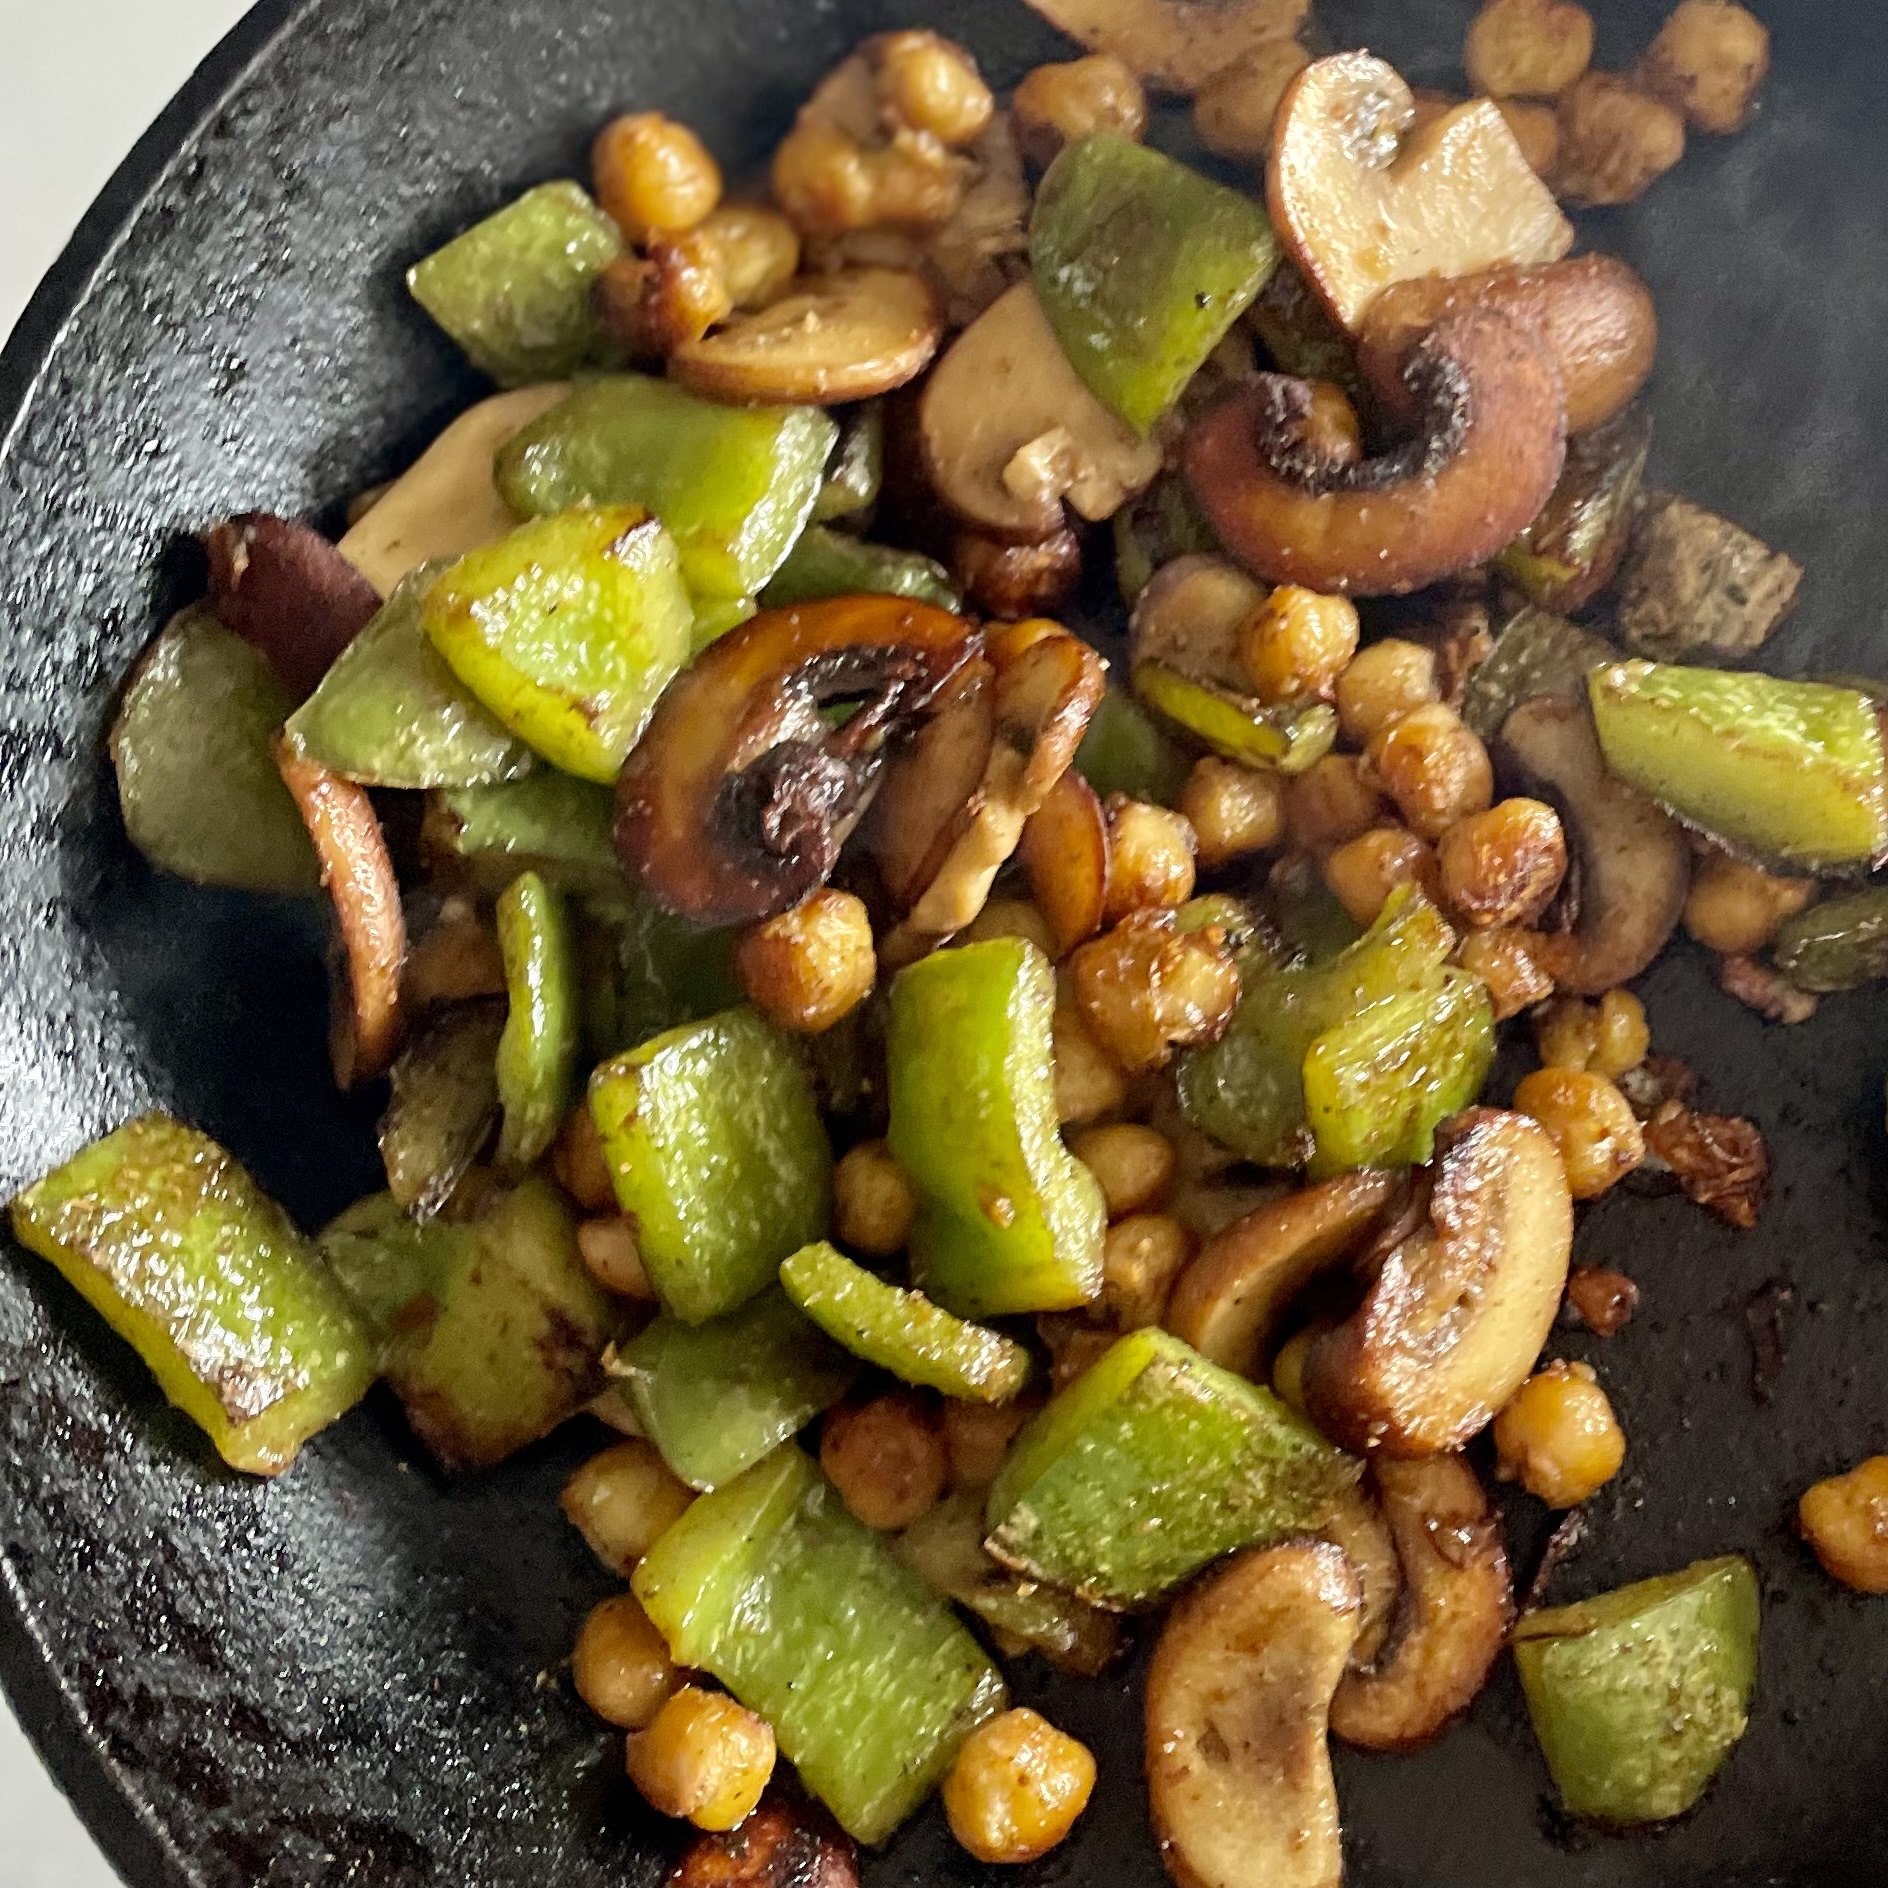 cast iron skillet with caramelized green bell pepper, cremini mushrooms, and chickpeas